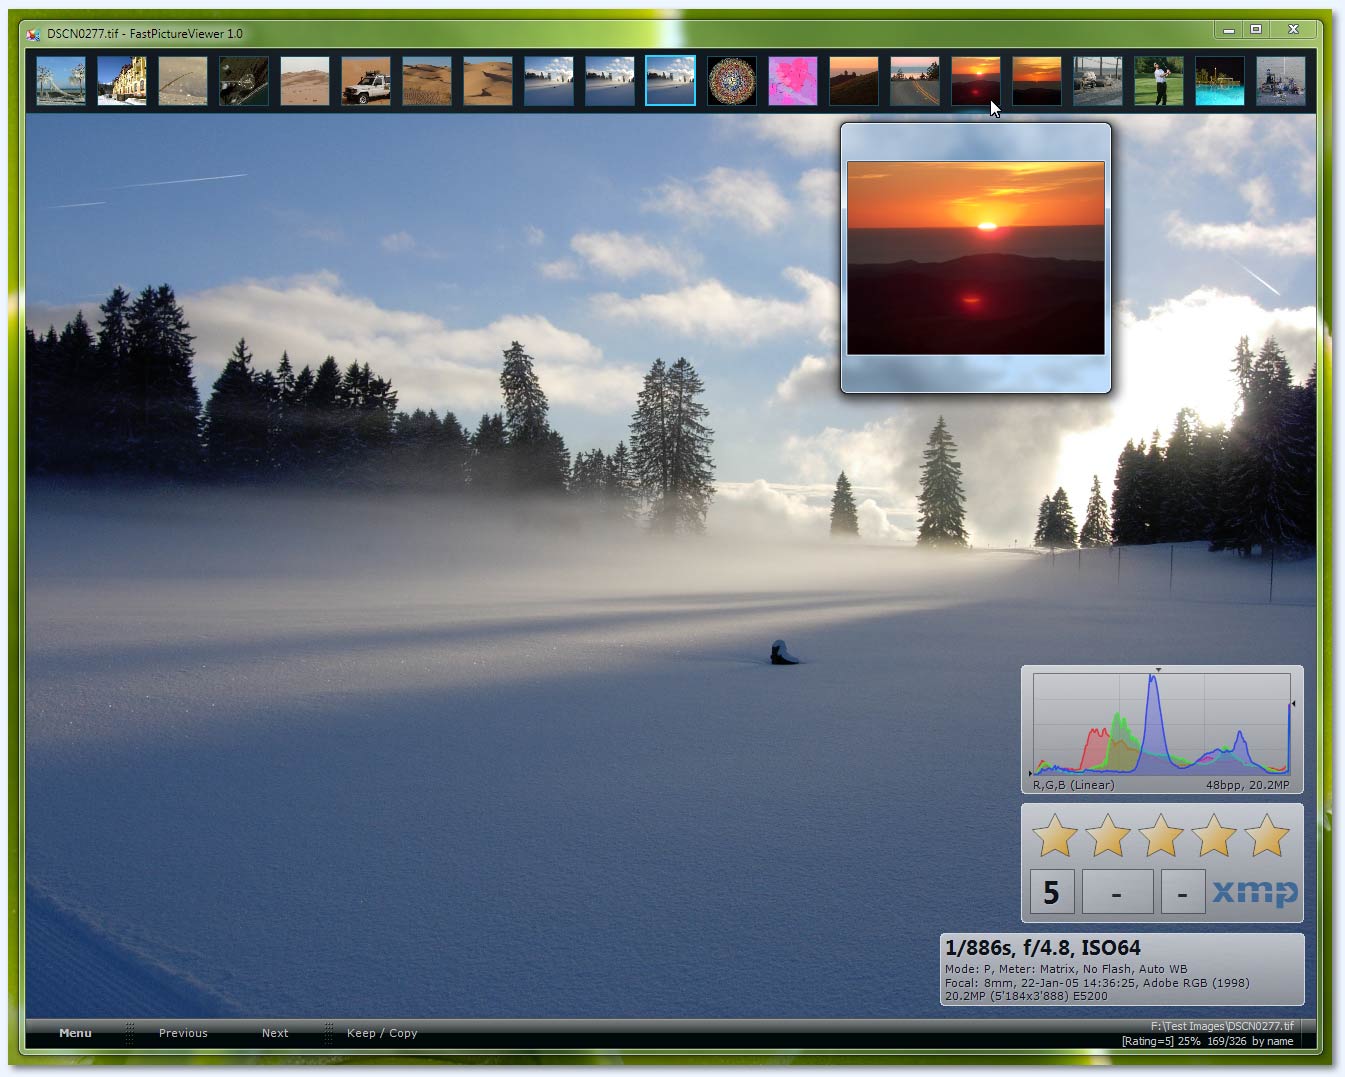 FastPictureViewer Professional 1.2 Raw Image Viewer running on Windows 7